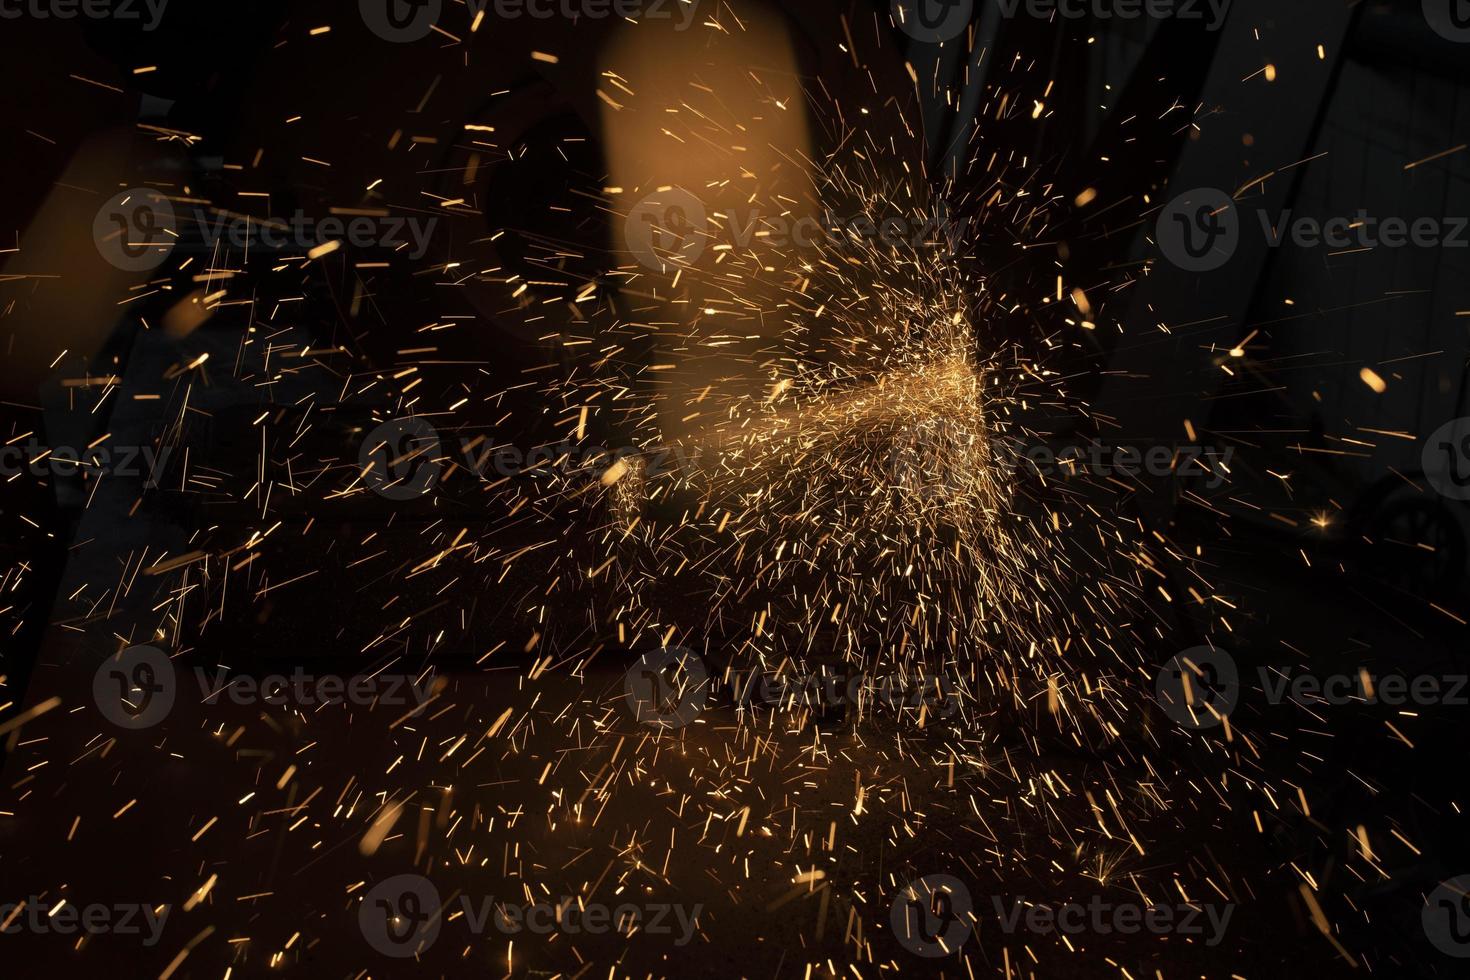 Sparks from grinder. Metal cutting. Bright lights in dark. Industrial background. photo